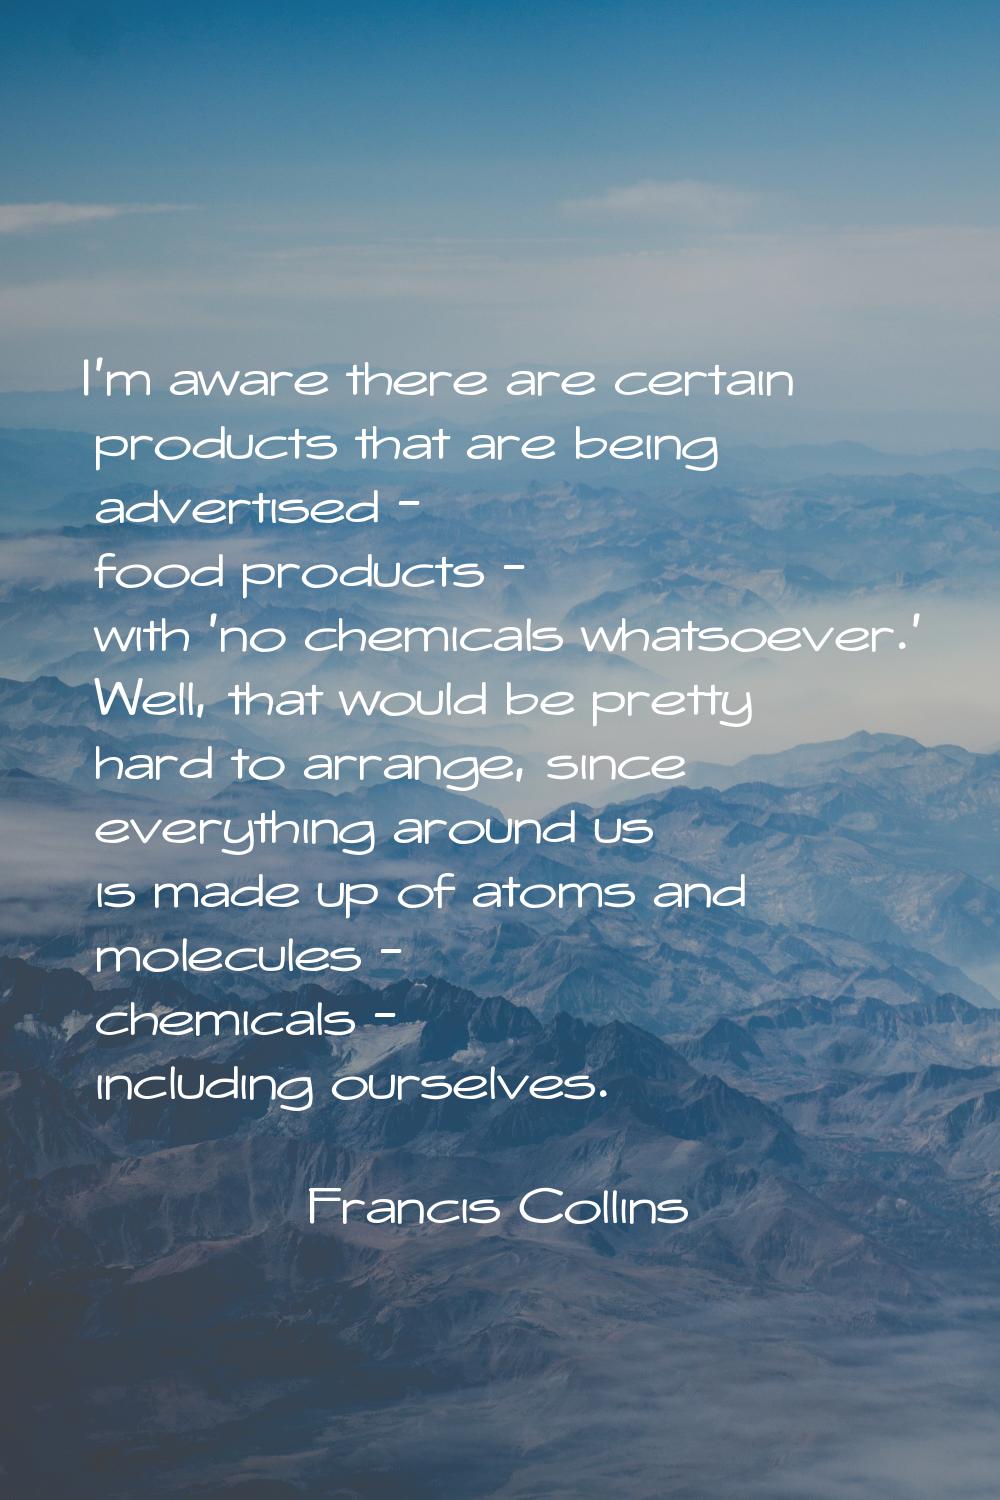 I'm aware there are certain products that are being advertised - food products - with 'no chemicals